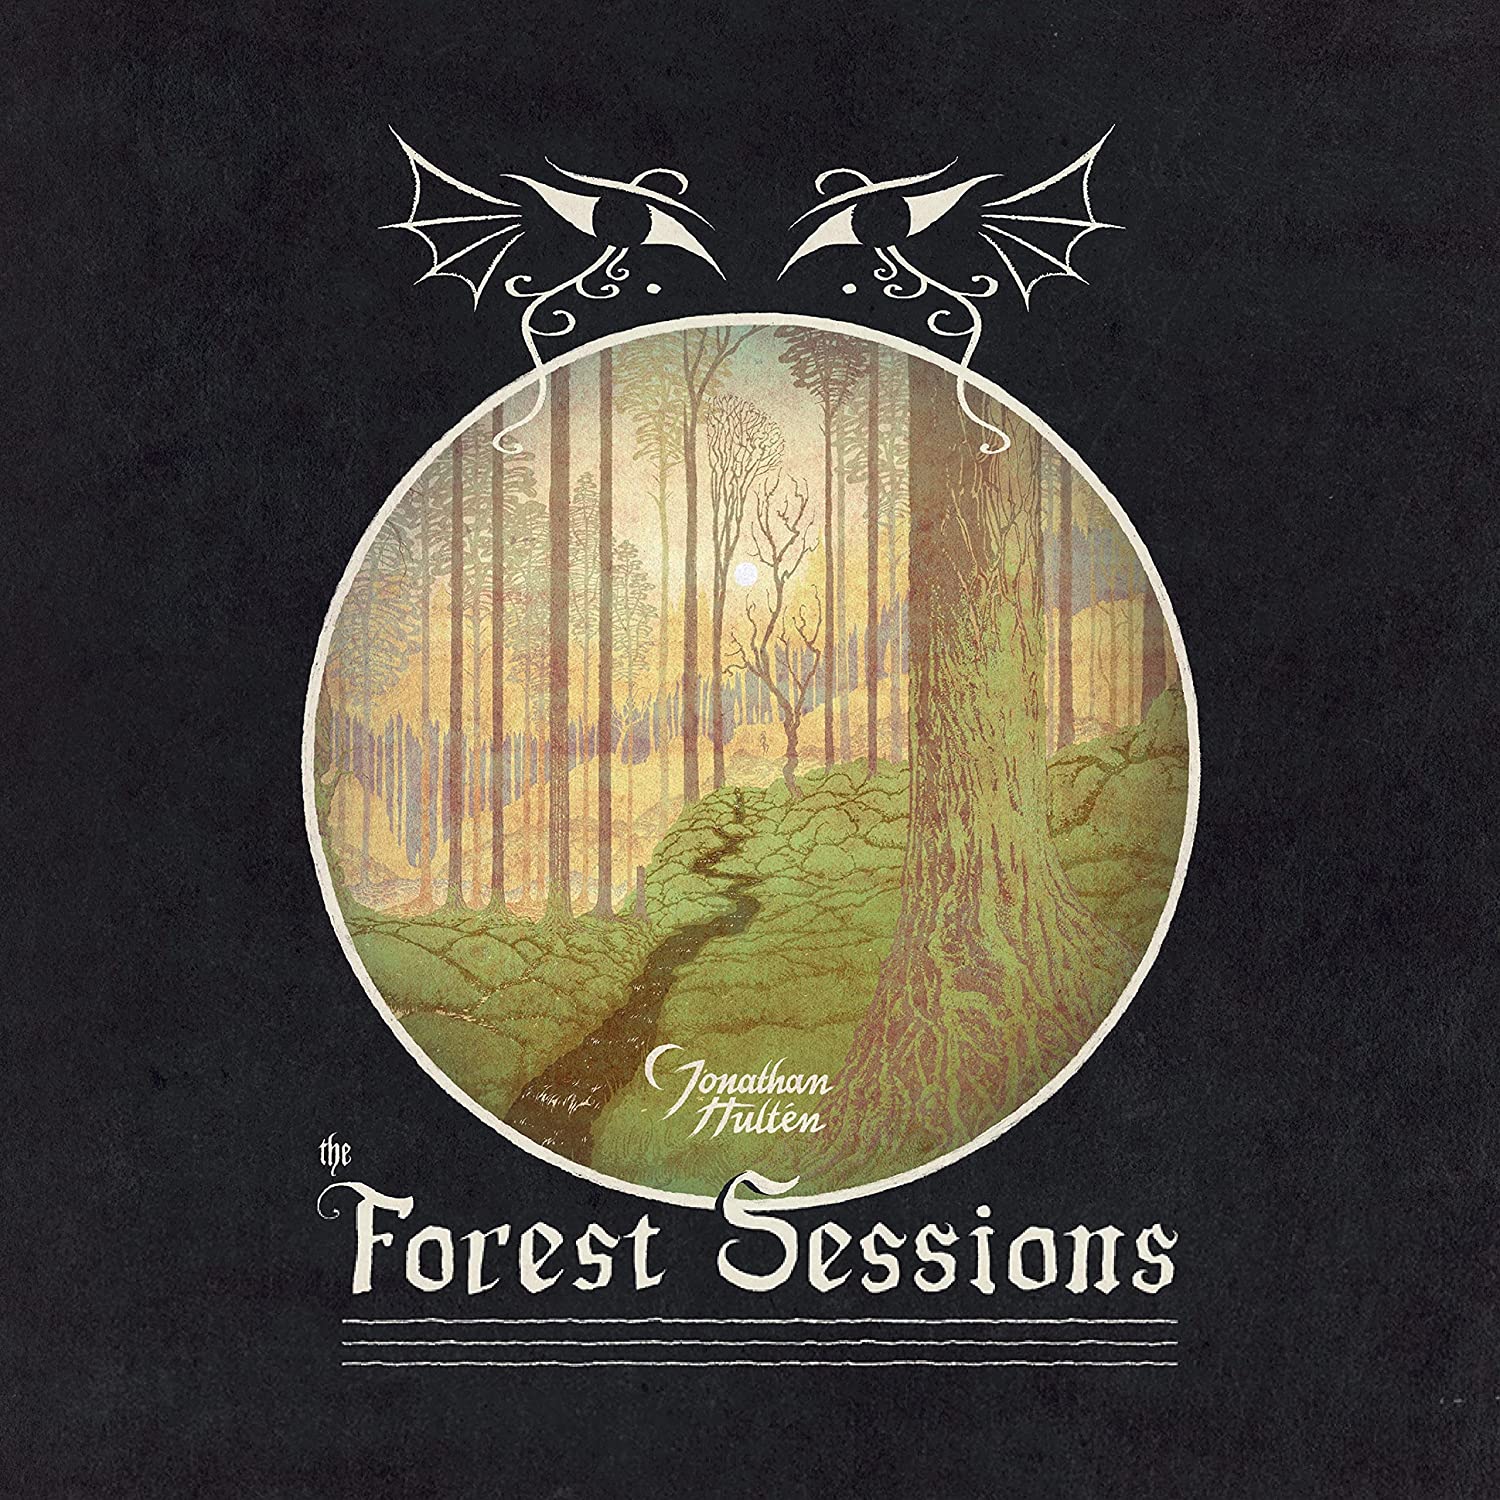 JONATHAN HULTEN – ‘The Forest Sessions’ cover album